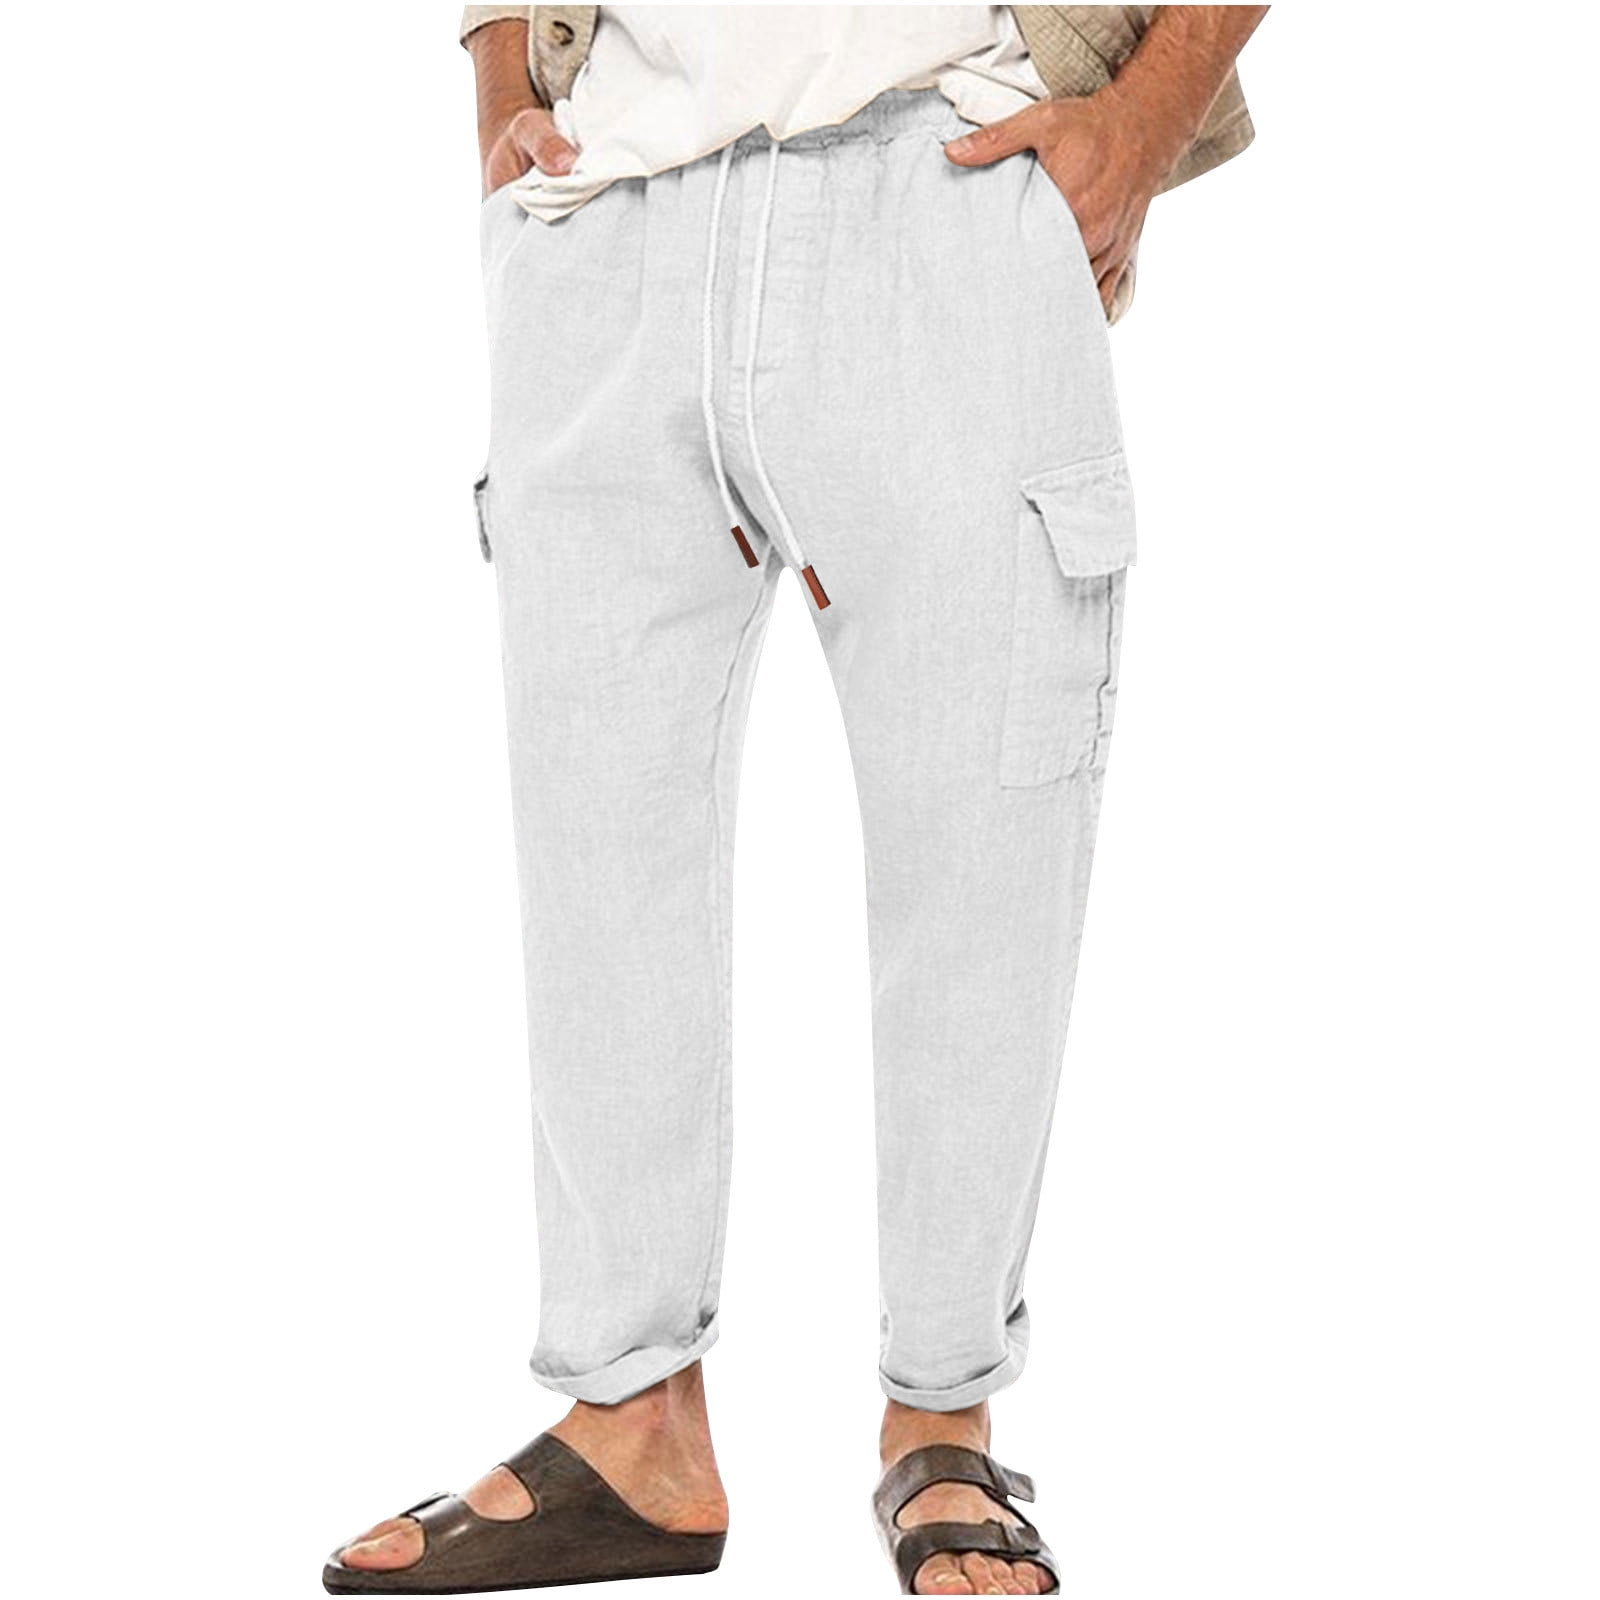 Men's Casual Loose Straight Trousers Drawstring Linen Tang Suit Pants Beach